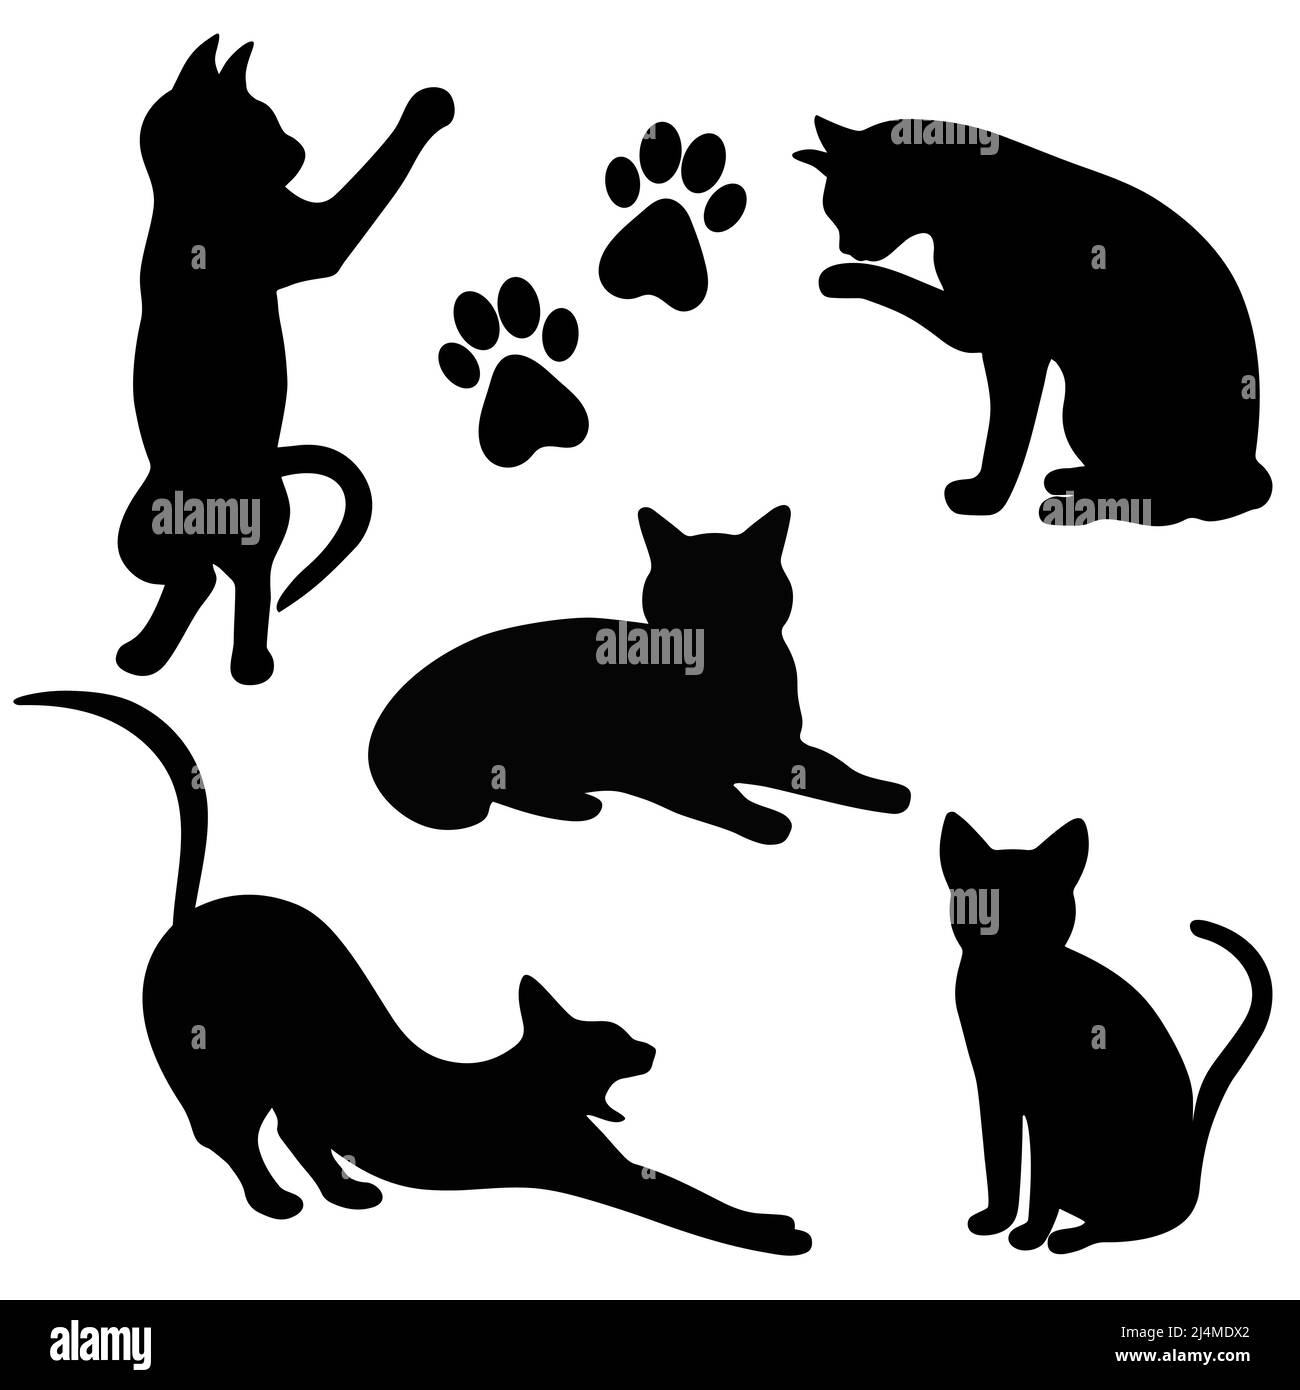 Cats silhouettes set vector illustration Stock Vector